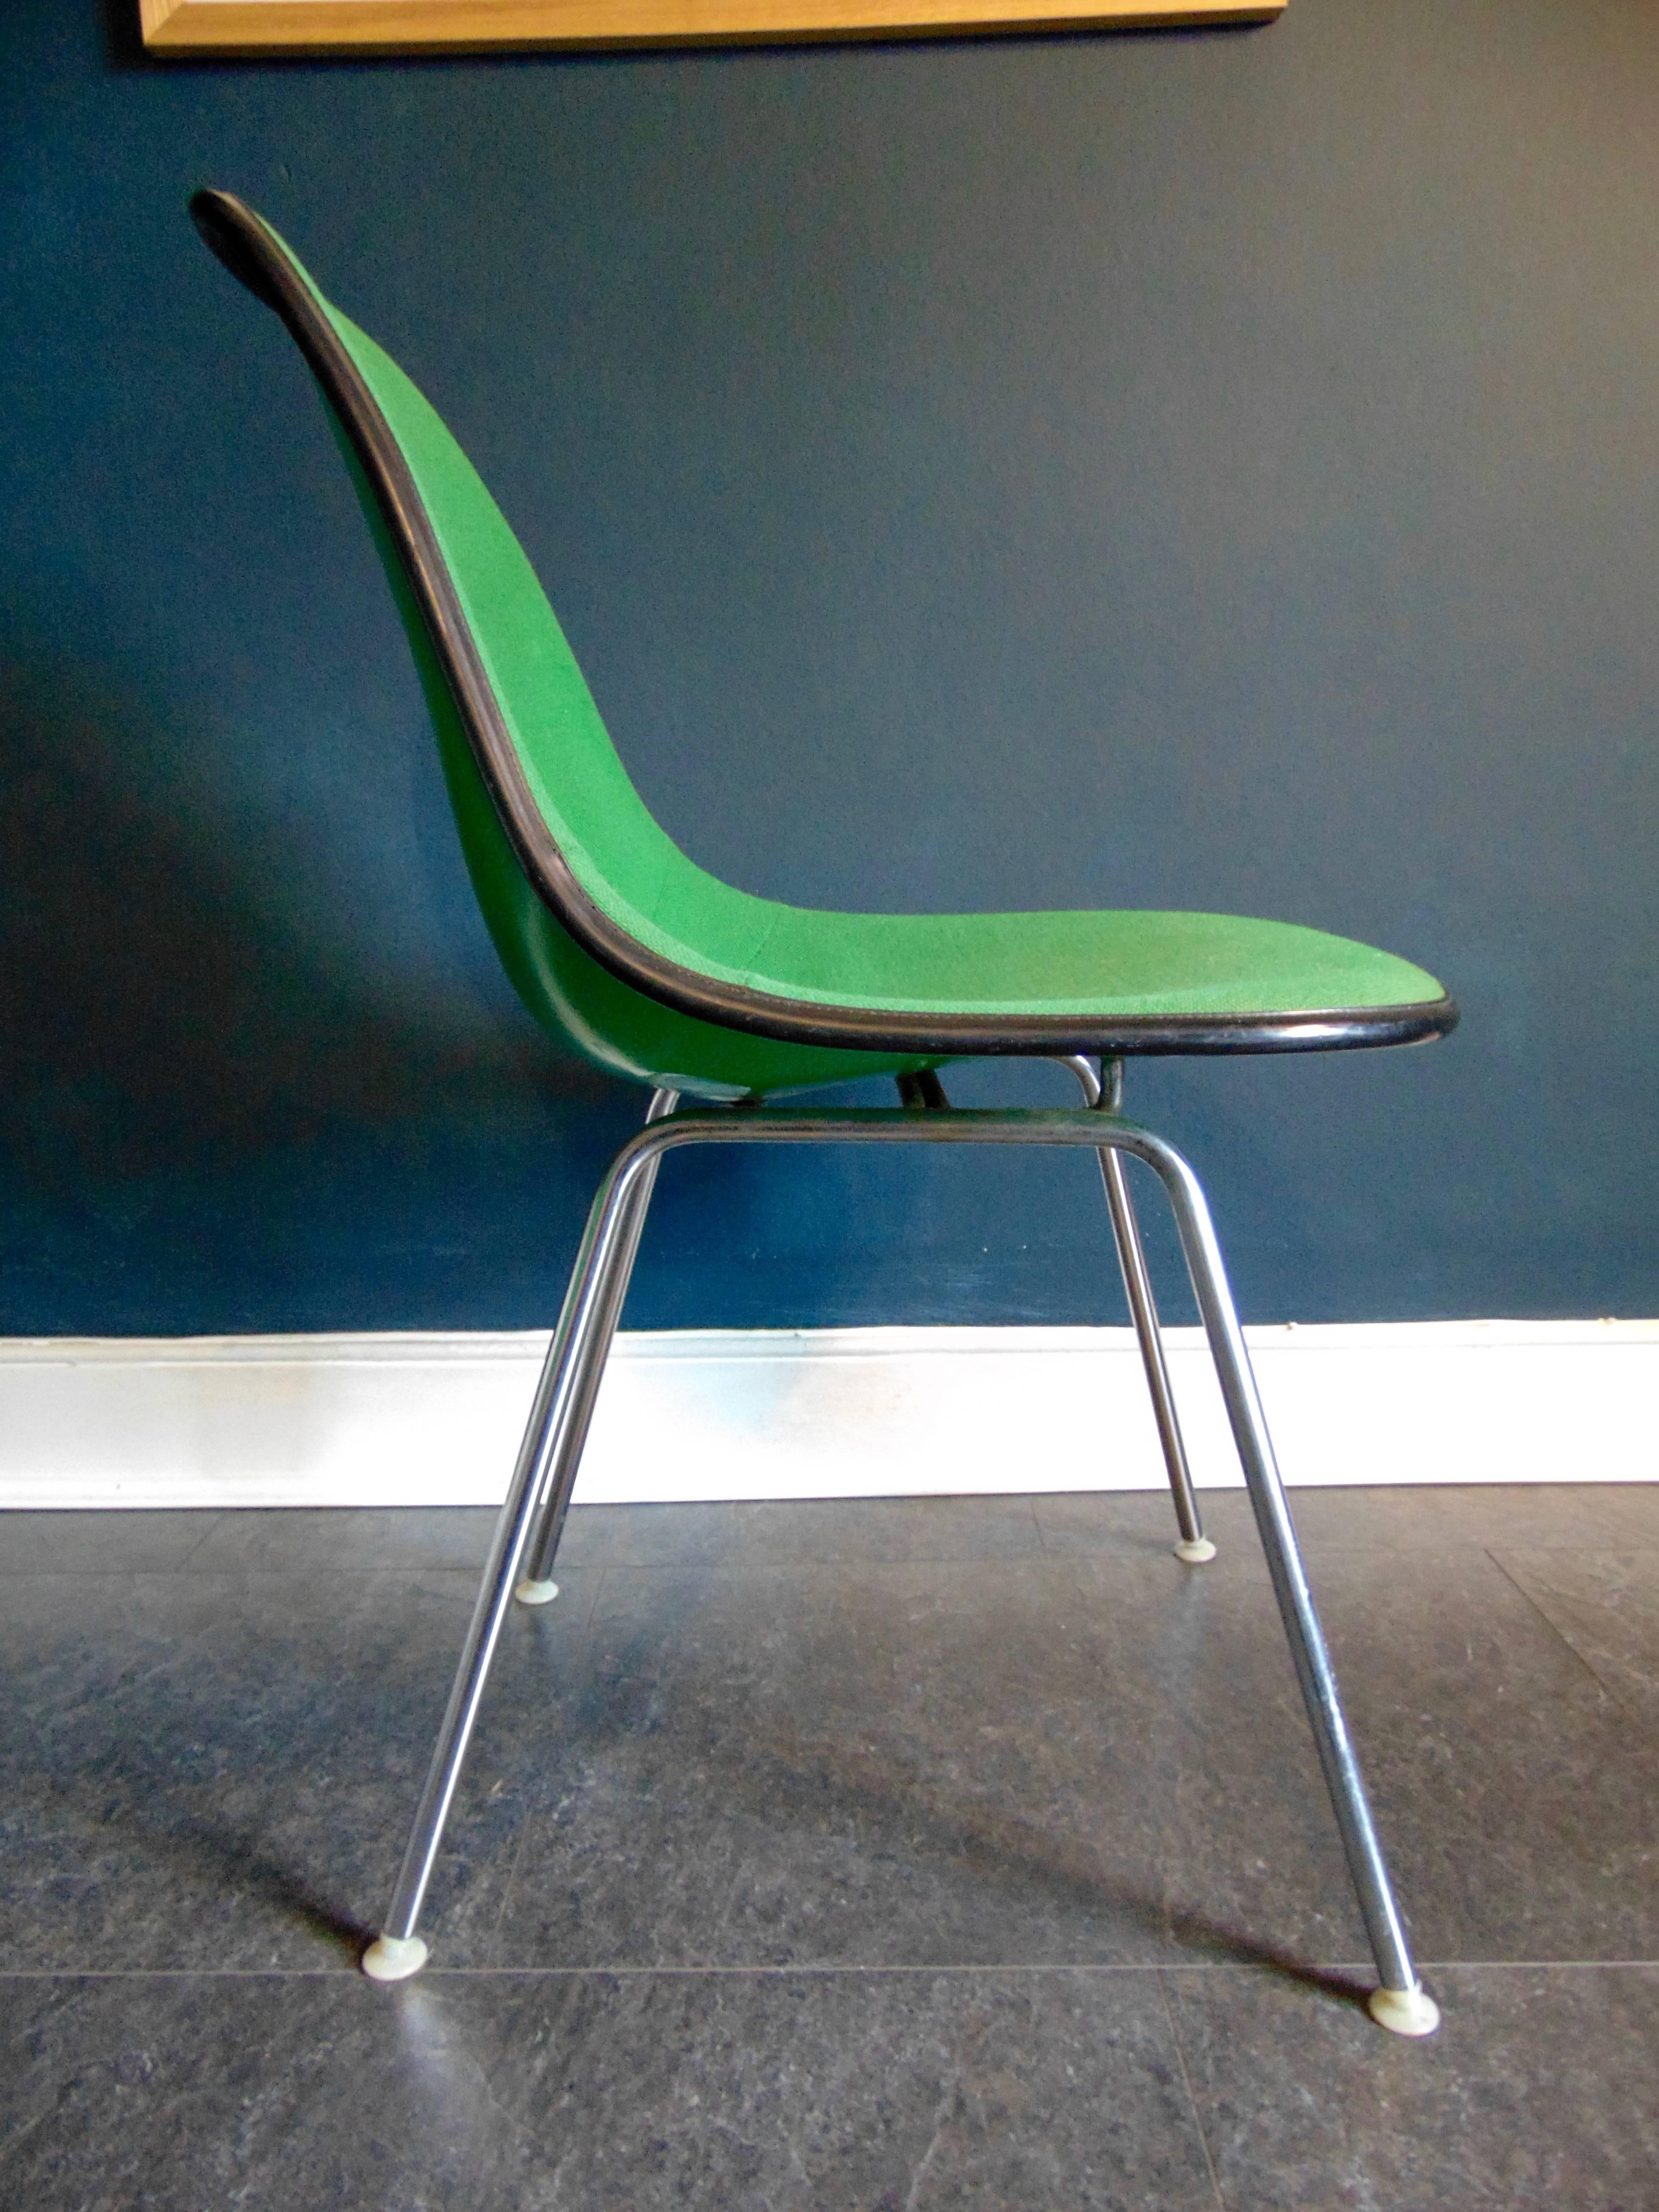 A pair of vintage Charles Eames side chairs produced by Herman Miller during the 1960s.
Green moulded fibre glass shells with cushioned seats, original upholstery on steel H base legs with nylon feet.
Two chairs available, price is per